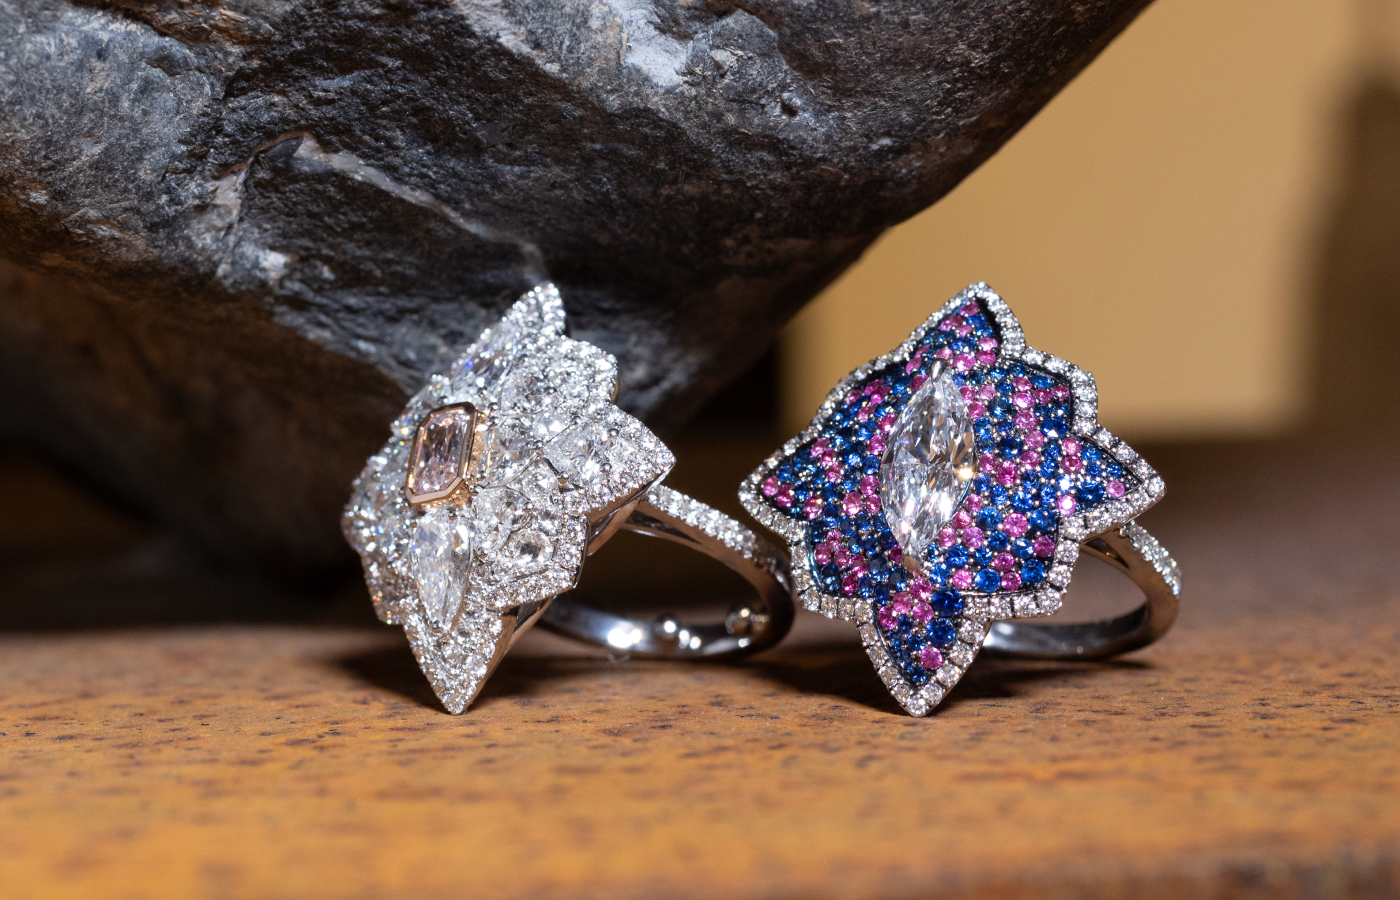 ZARIG Aurelia pink diamond cocktail ring (left) and the Aurelia ring with a 1.12-carat marquise-cut diamond